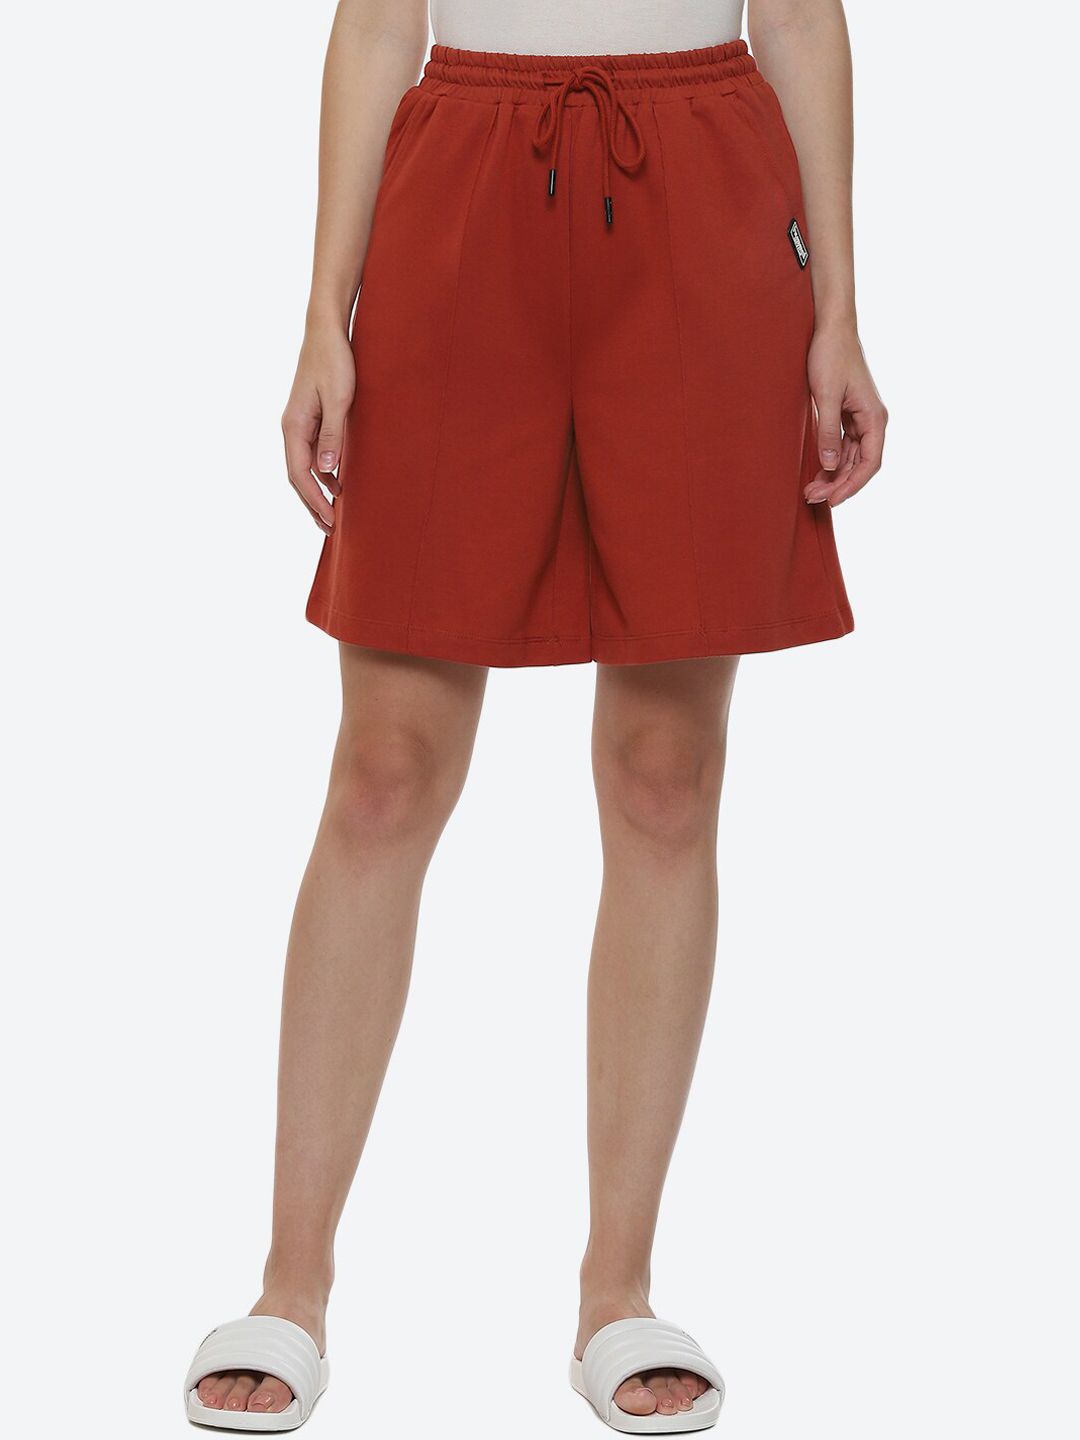 hummel Above-Knee Divided Skirt Price in India